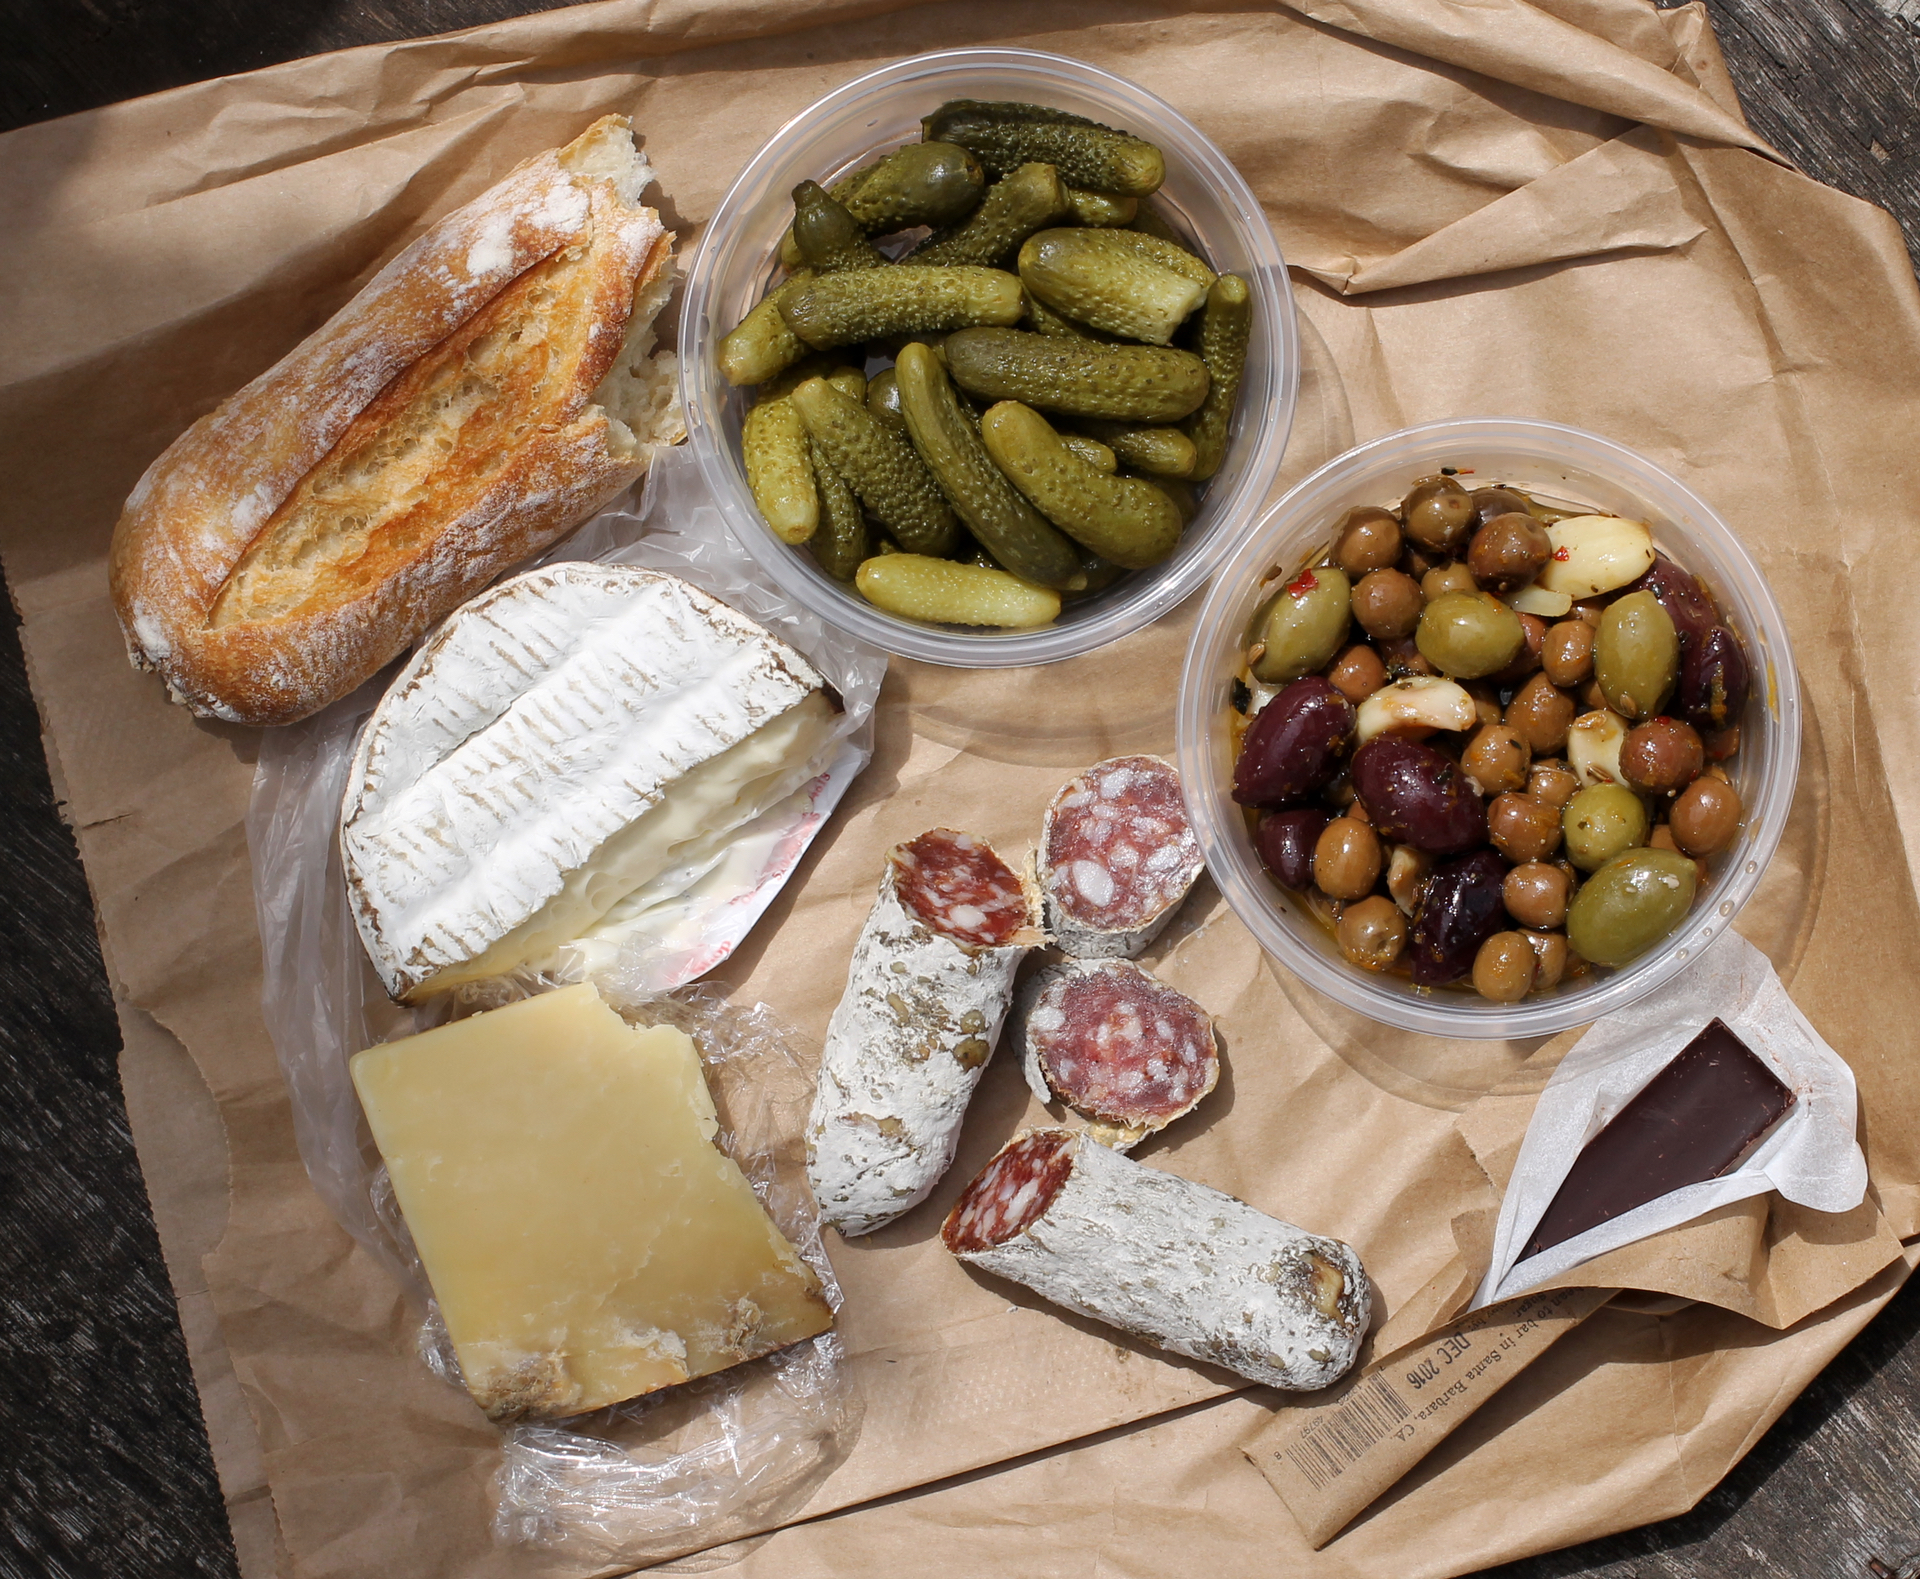 From top left, moving clockwise: Semifreddi’s baguette, cornichon, mixed olives, Twenty-four Blackbirds chocolate, Olympia Provisions sopressata, Montgomery’s Farmhouse cheddar, and Jasper Hill Harbison, all from The Pasta Shop.